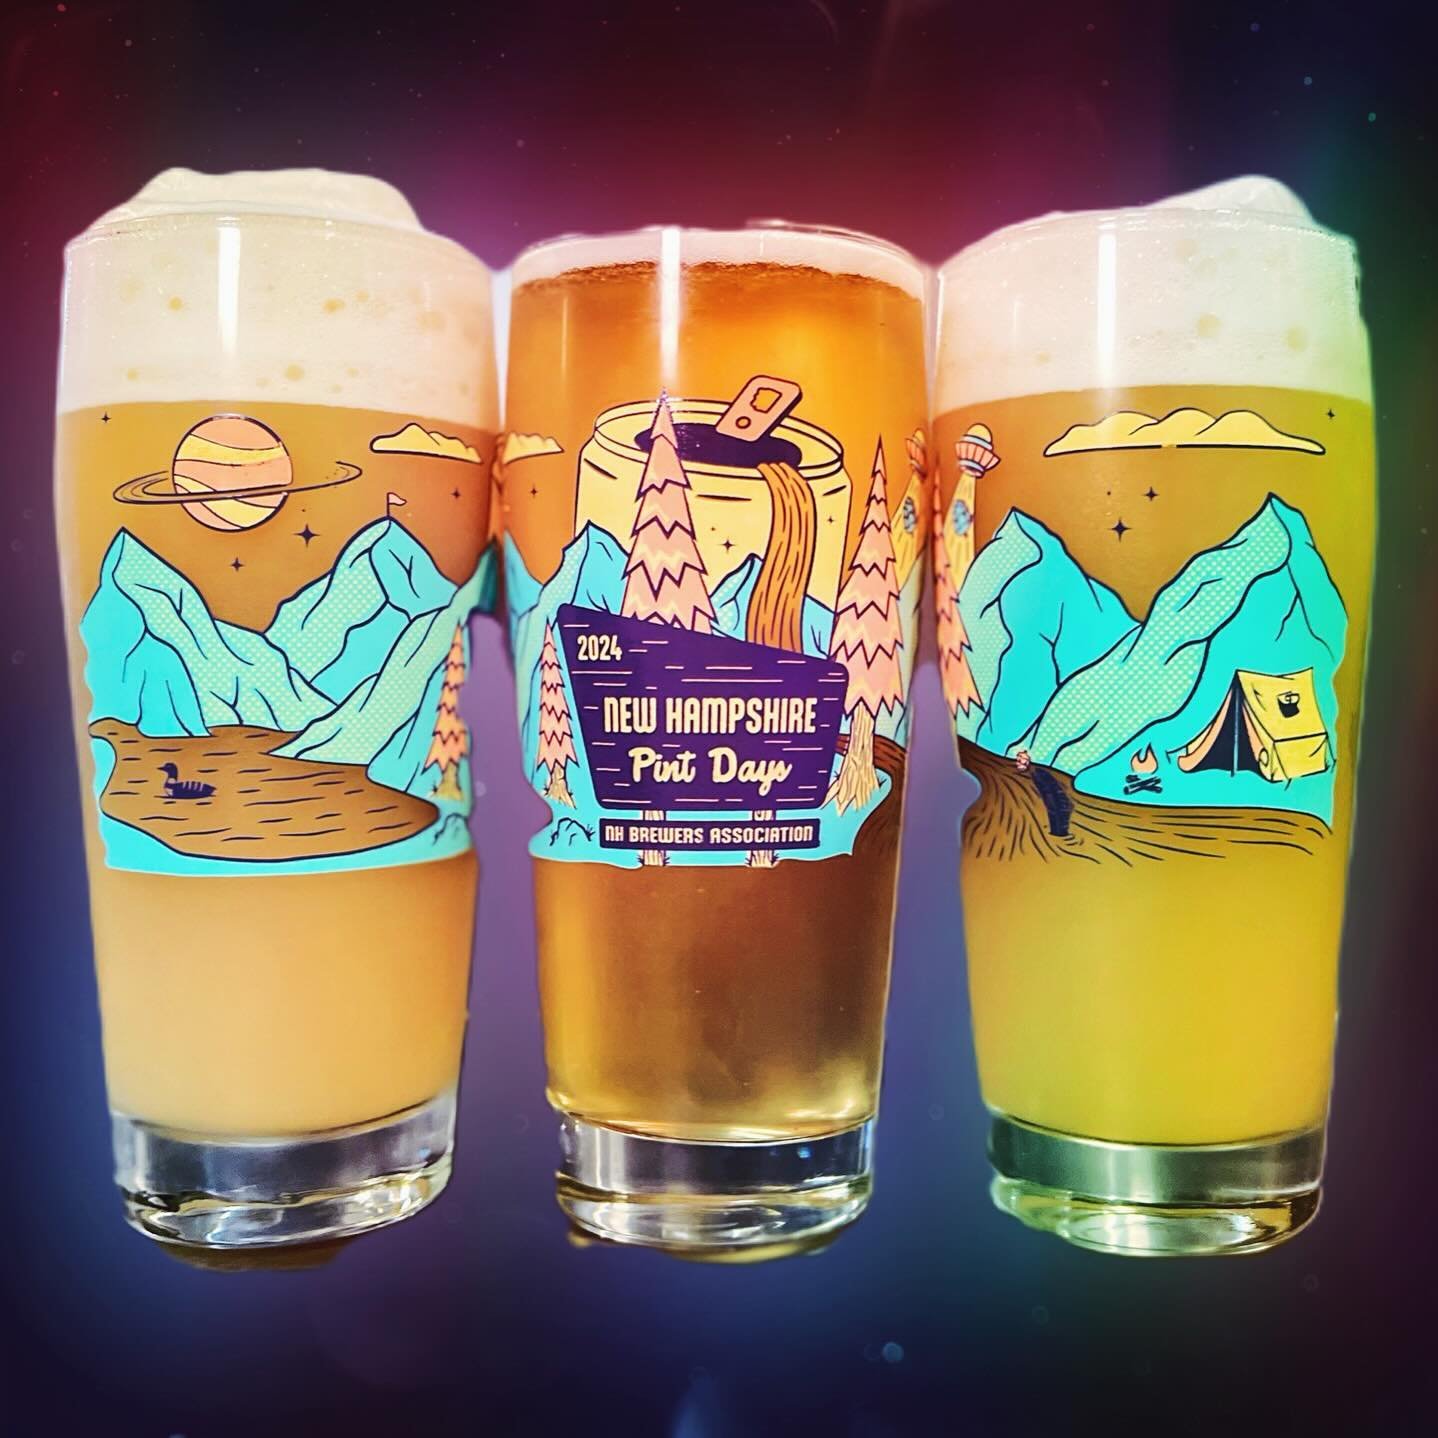 NH Pint Days Glassware!

Limited Number left at the brewery!

Dive into the extraterrestrial vibes and add a splash of creativity to your glassware collection with the 2024 NH Pint Days! These 16 oz. Willi Becher glasses feature the incredible artwor